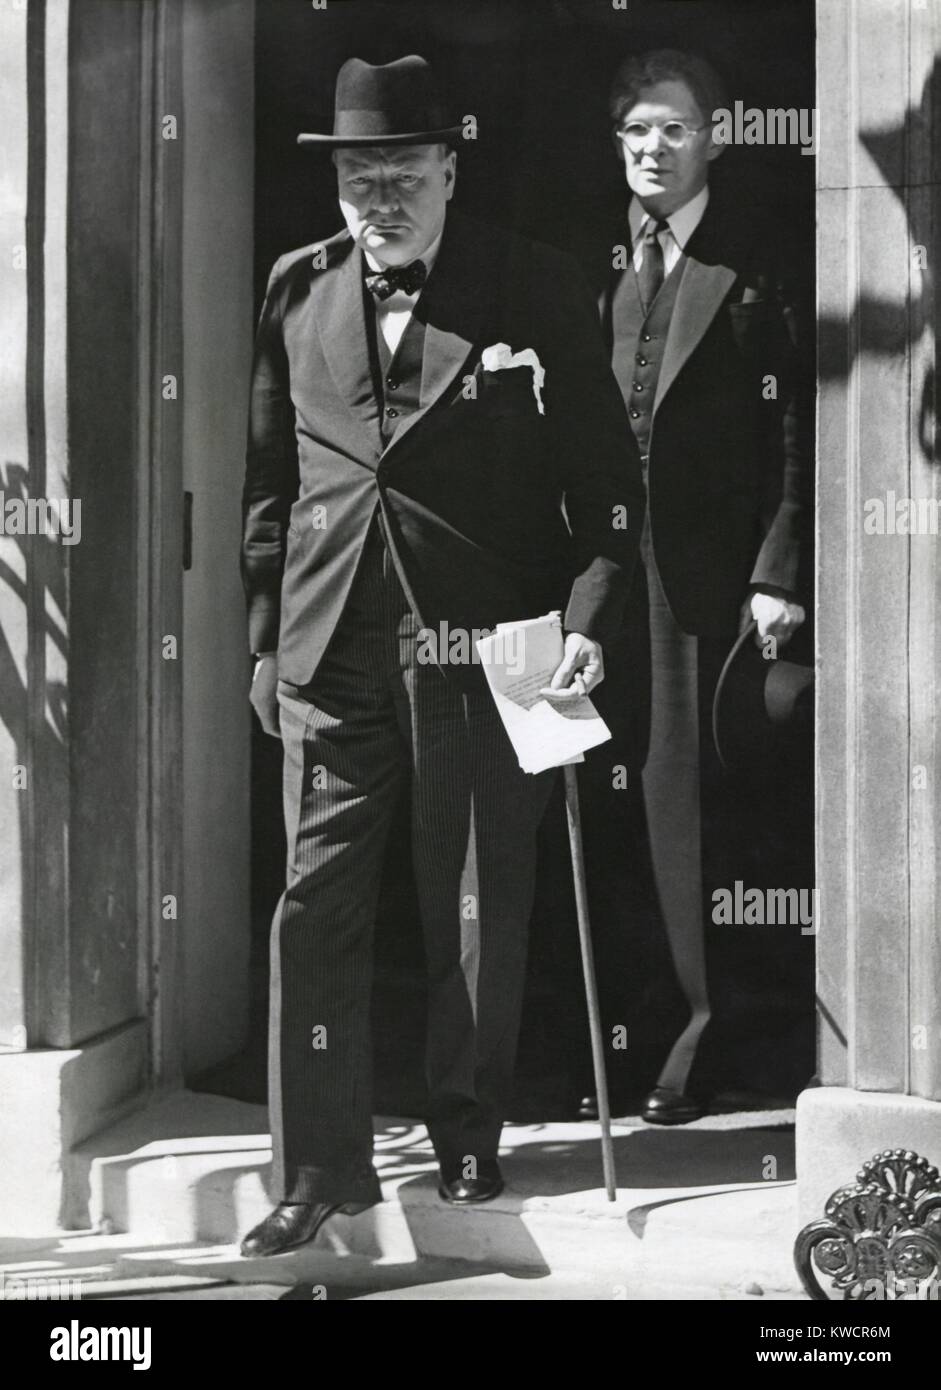 Prime Minister Winston Churchill leaving 10 Downing Street to speak to Parliament on June 18, 1940. He announced Britain has more than 1,250,000 men under arms and Britain would fight alone 'for years' if necessary. Behind him is Brendan Bracken, a Conservative Party Parliamentary Private Secretary to the Prime Minister. The Germans had just defeated France and British troops had retreated from Dunkirk to England. - (BSLOC 2014 17 34) Stock Photo